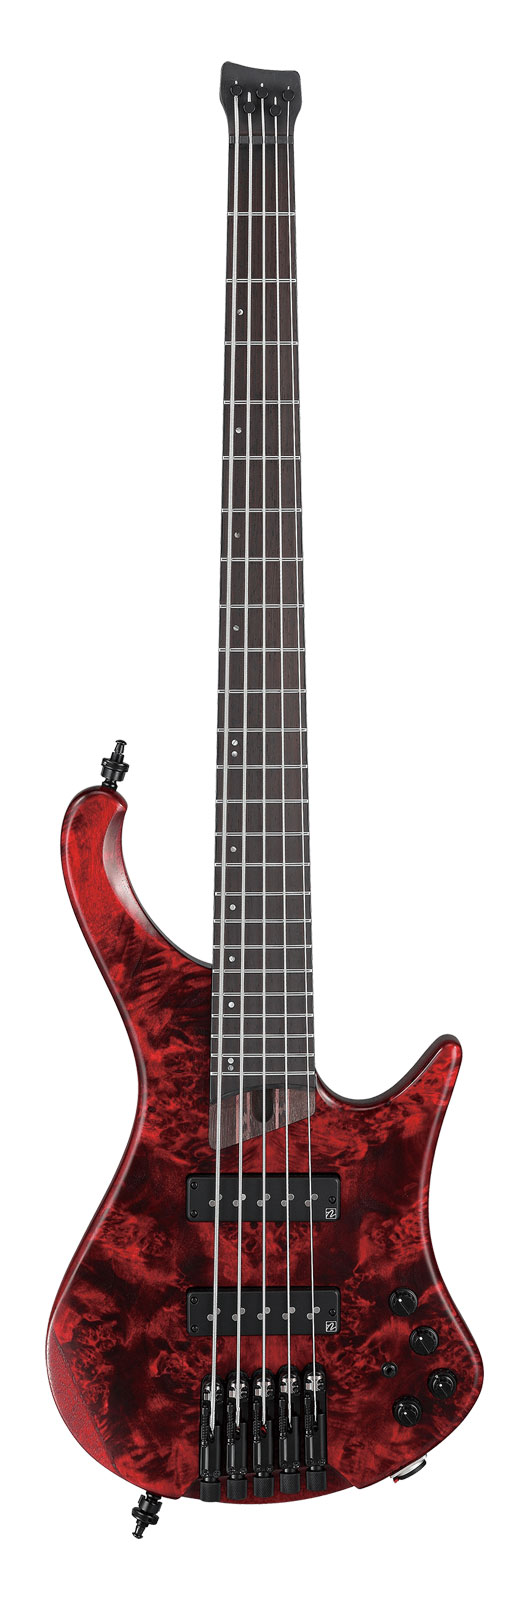 IBANEZ EHB1505-SWL STAINED WINE RED BASS WORKSHOP